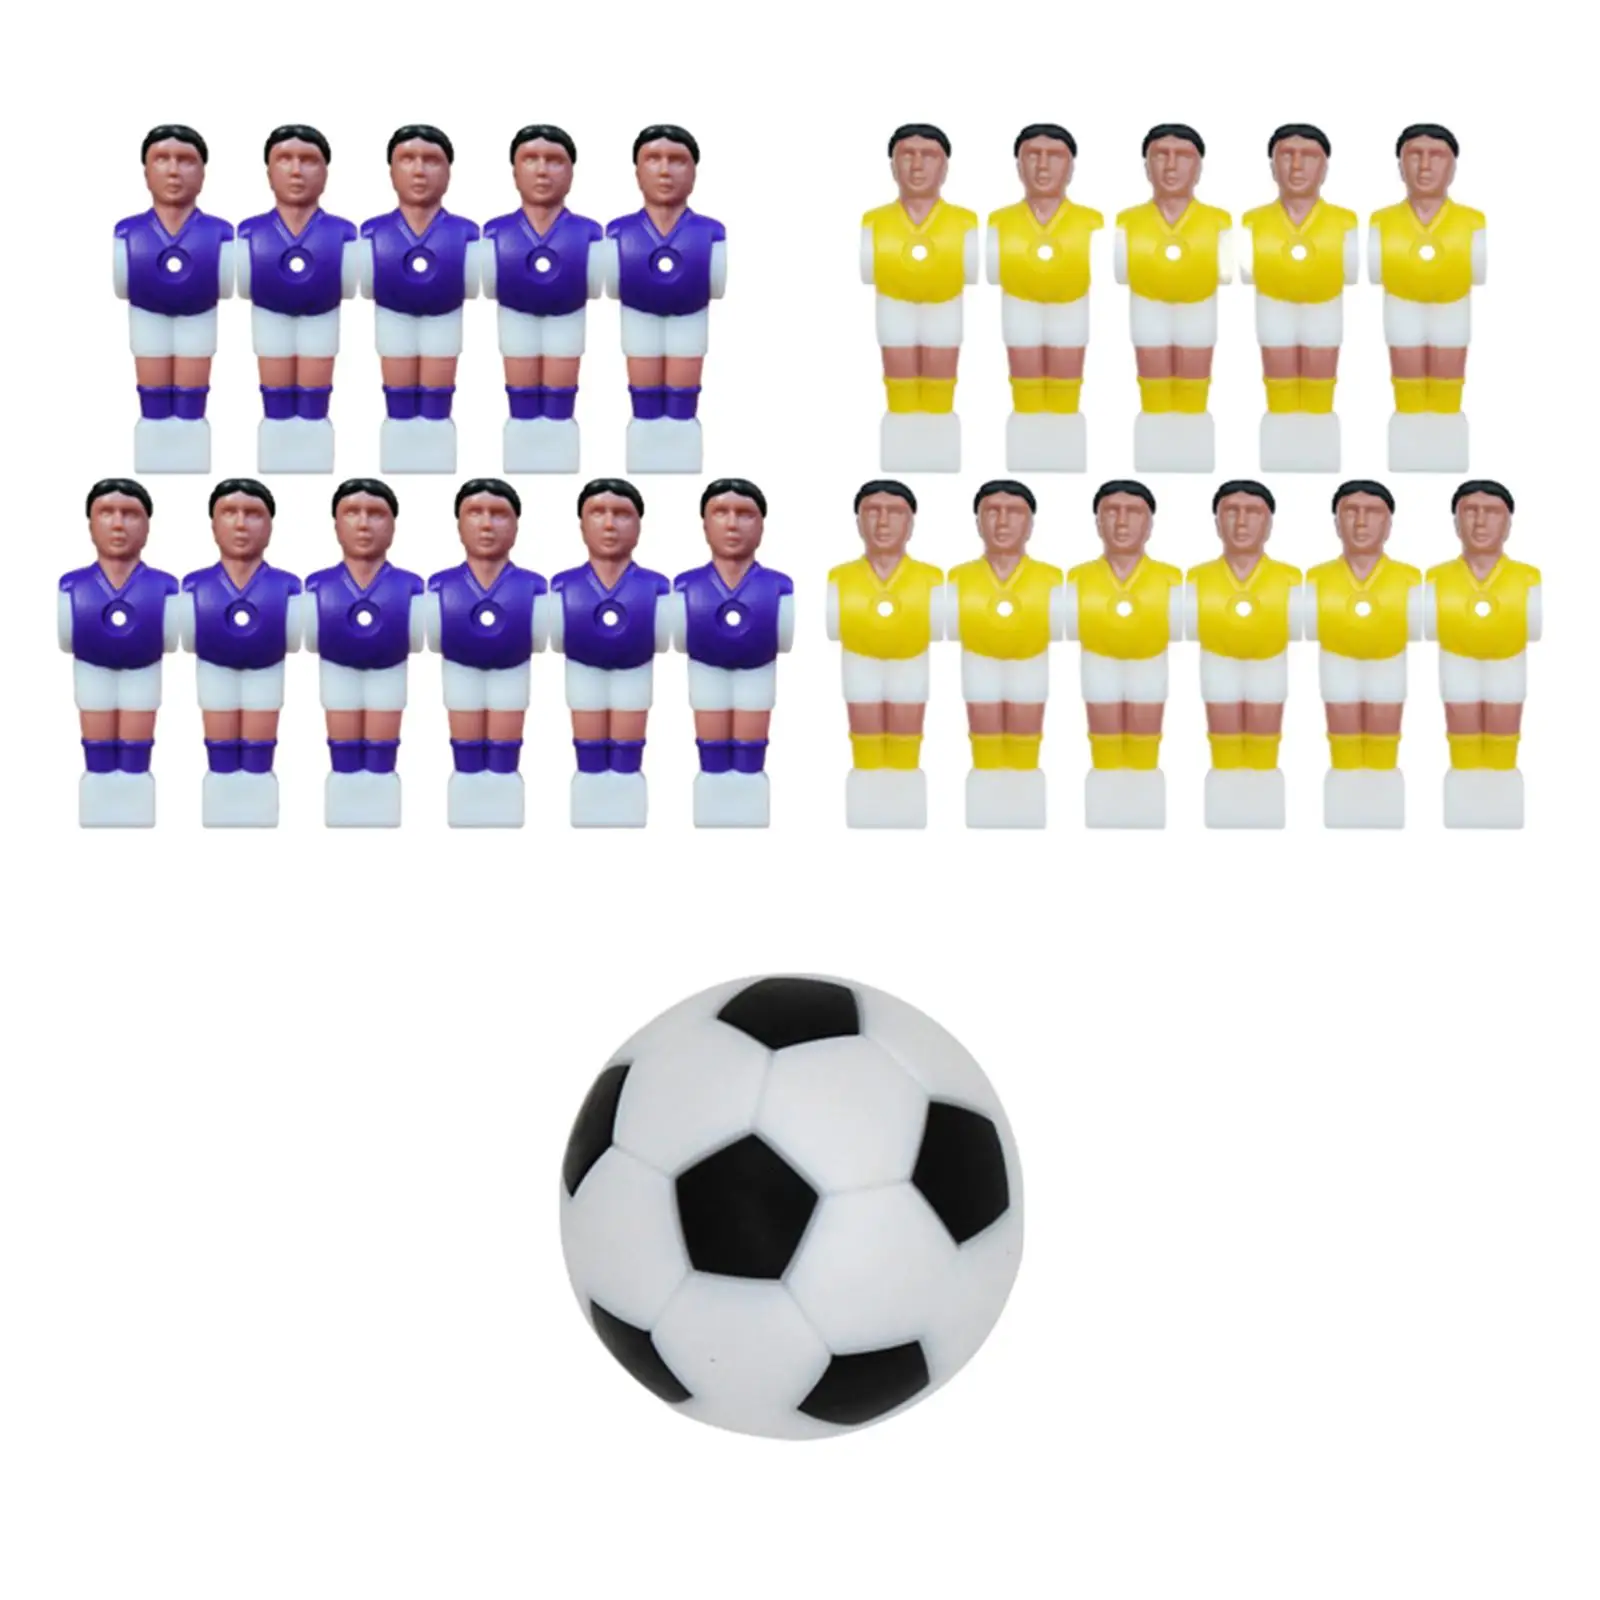 Foosball Men Replacement, Soccer Table Foosball Player, Mini Doll Table Football